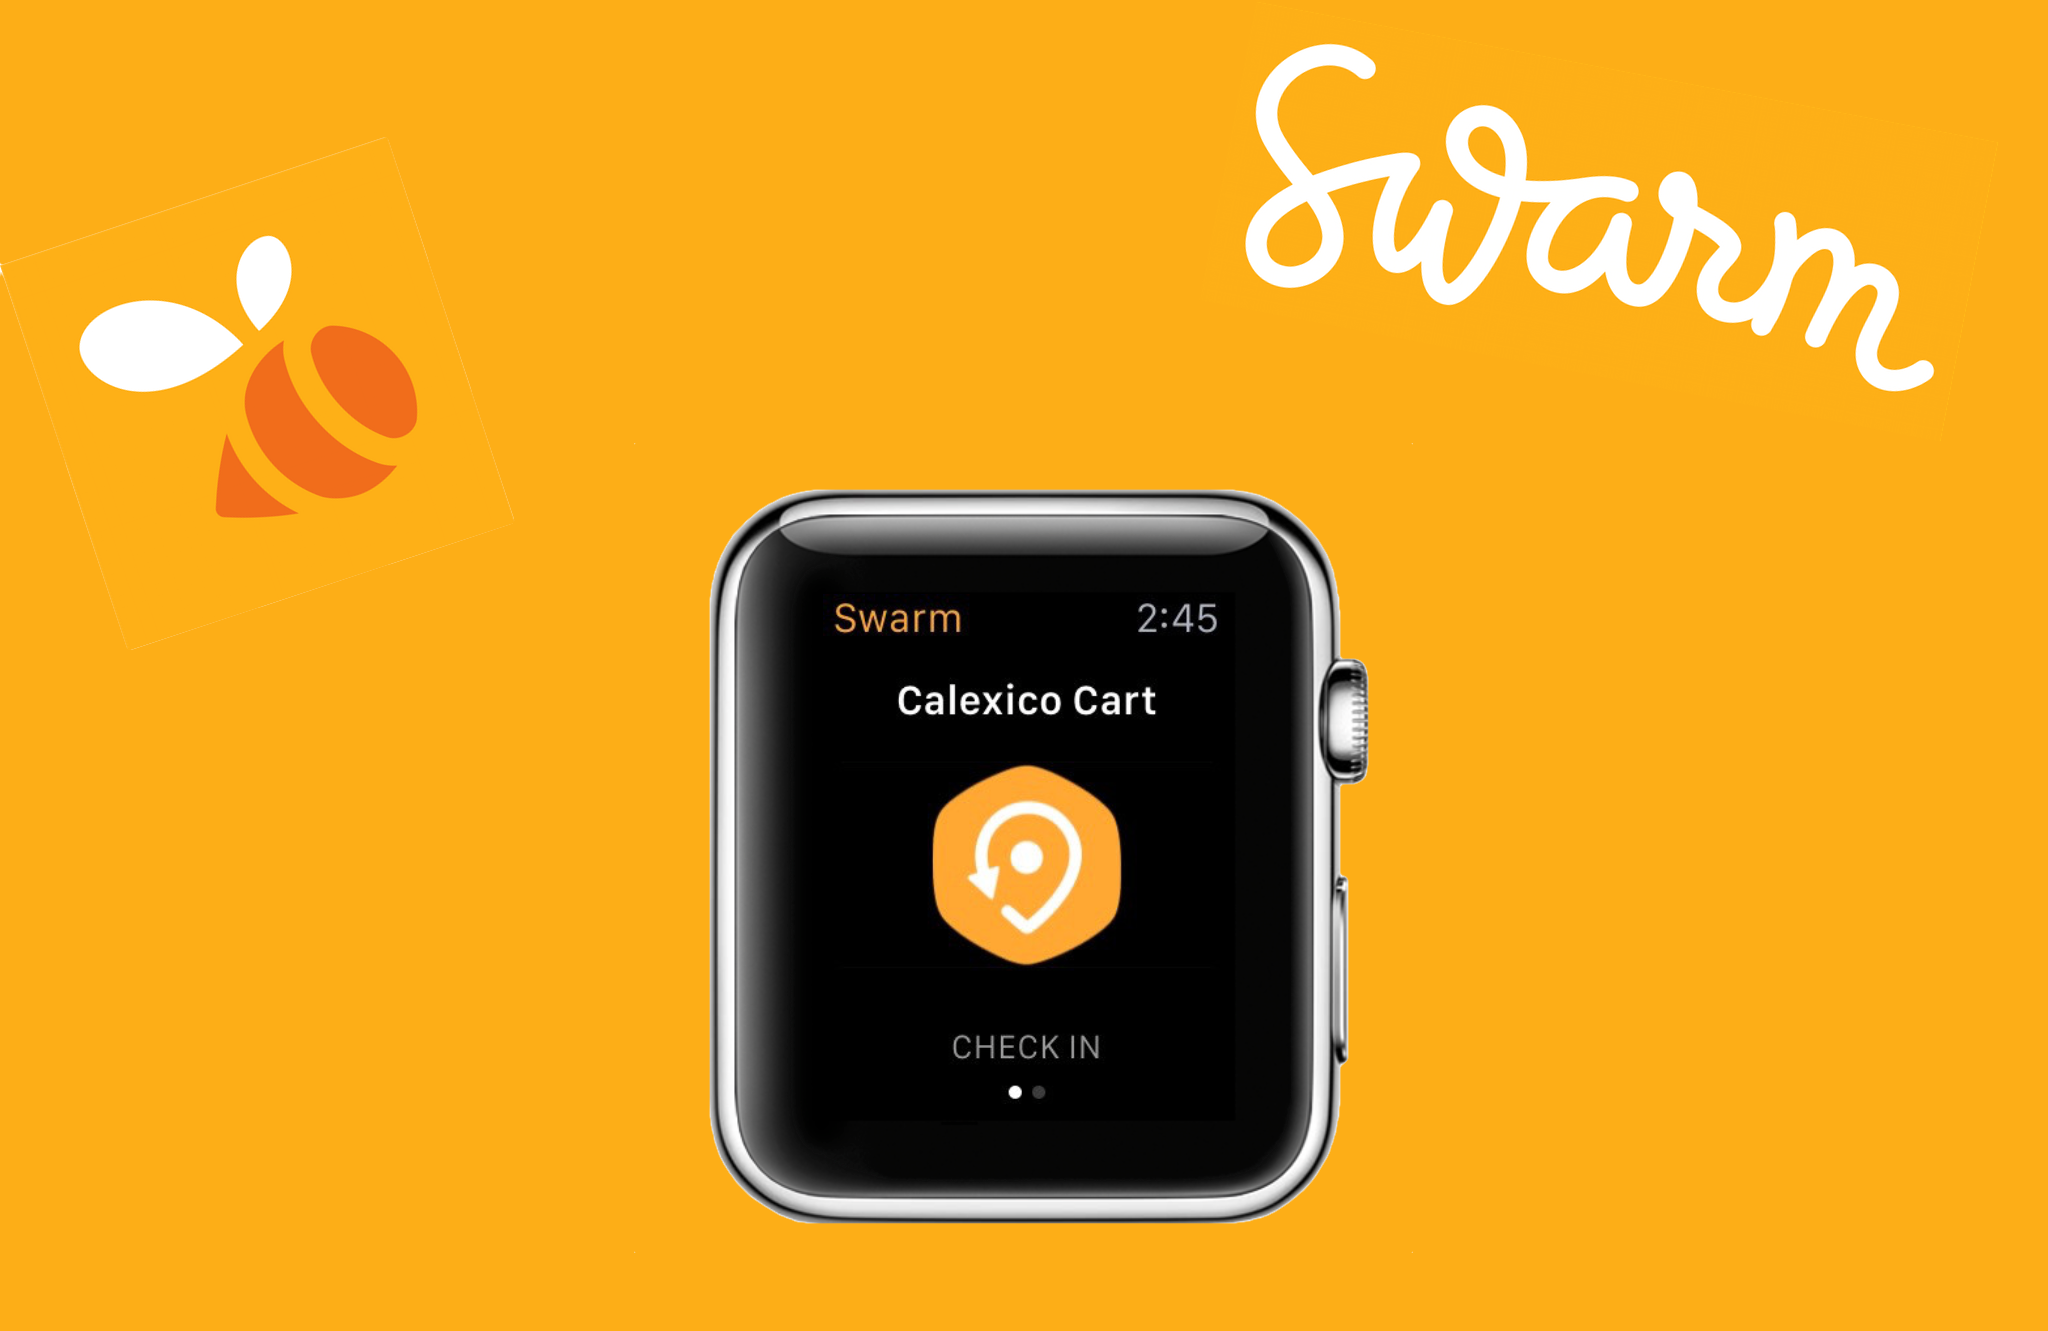 You Can Now Check In On Foursquare's Swarm With Your Apple Watch